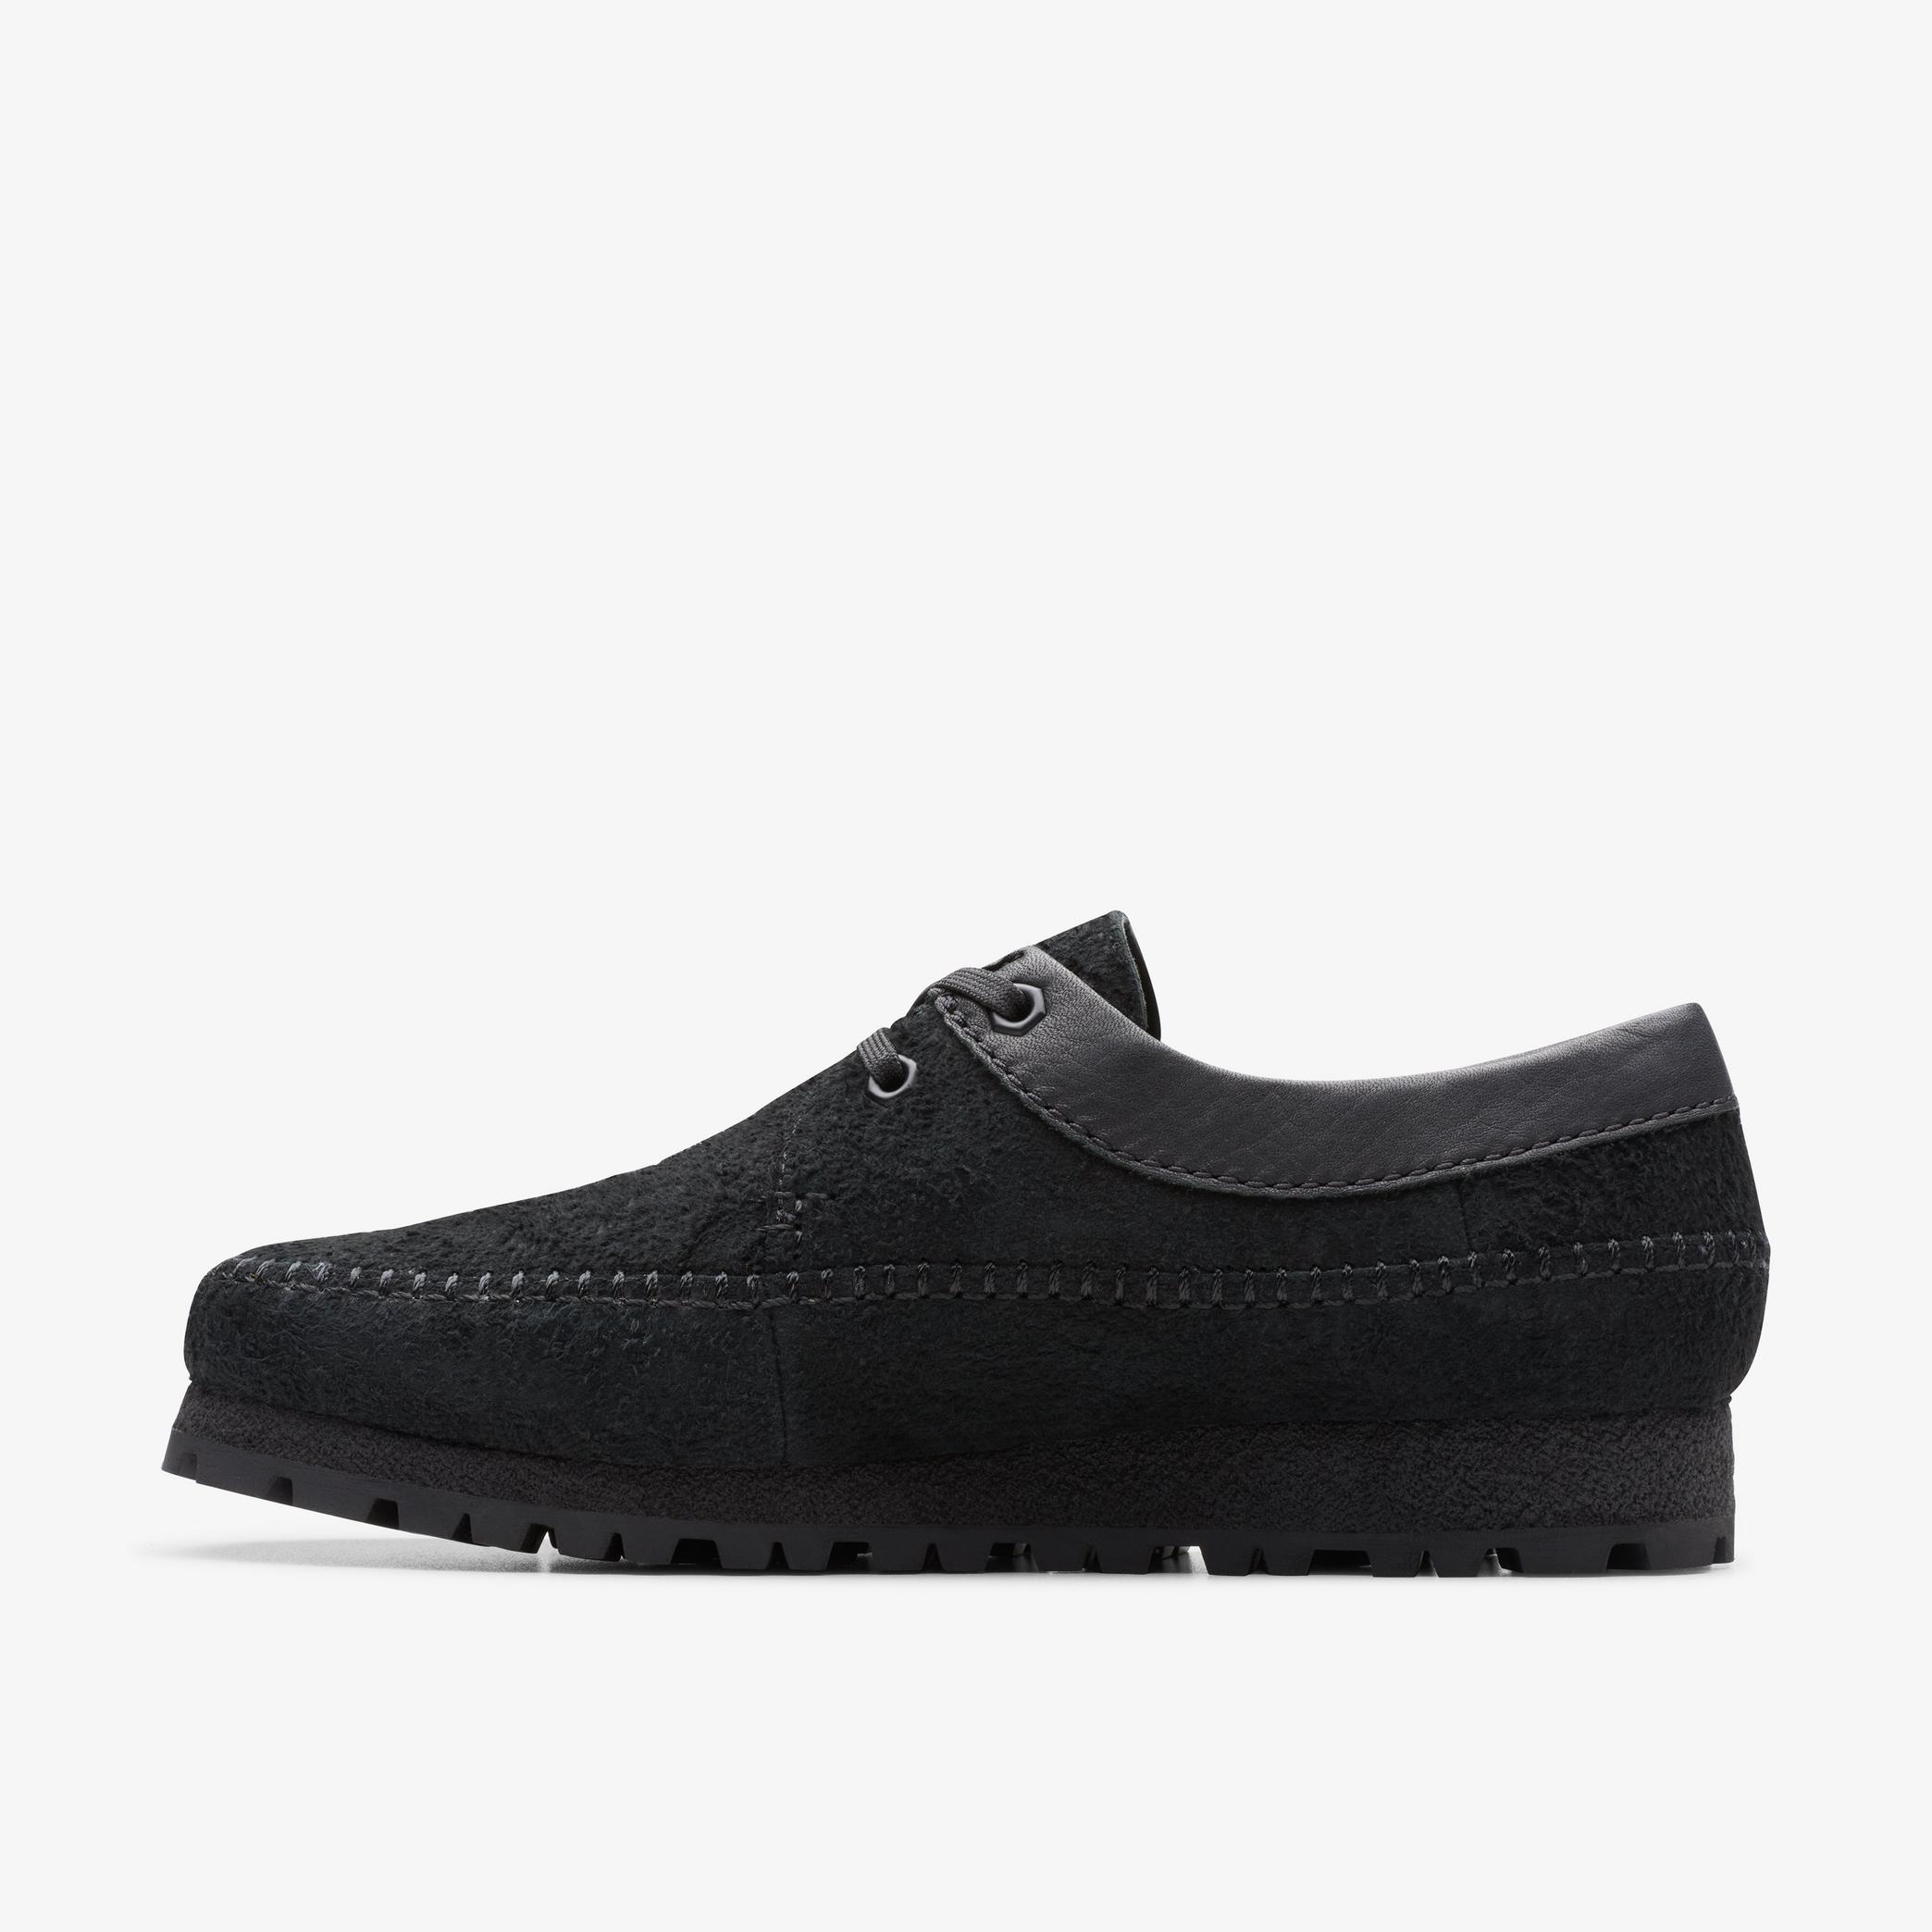 Weaver X Haven GORE-TEX Black Moccasins, view 2 of 6